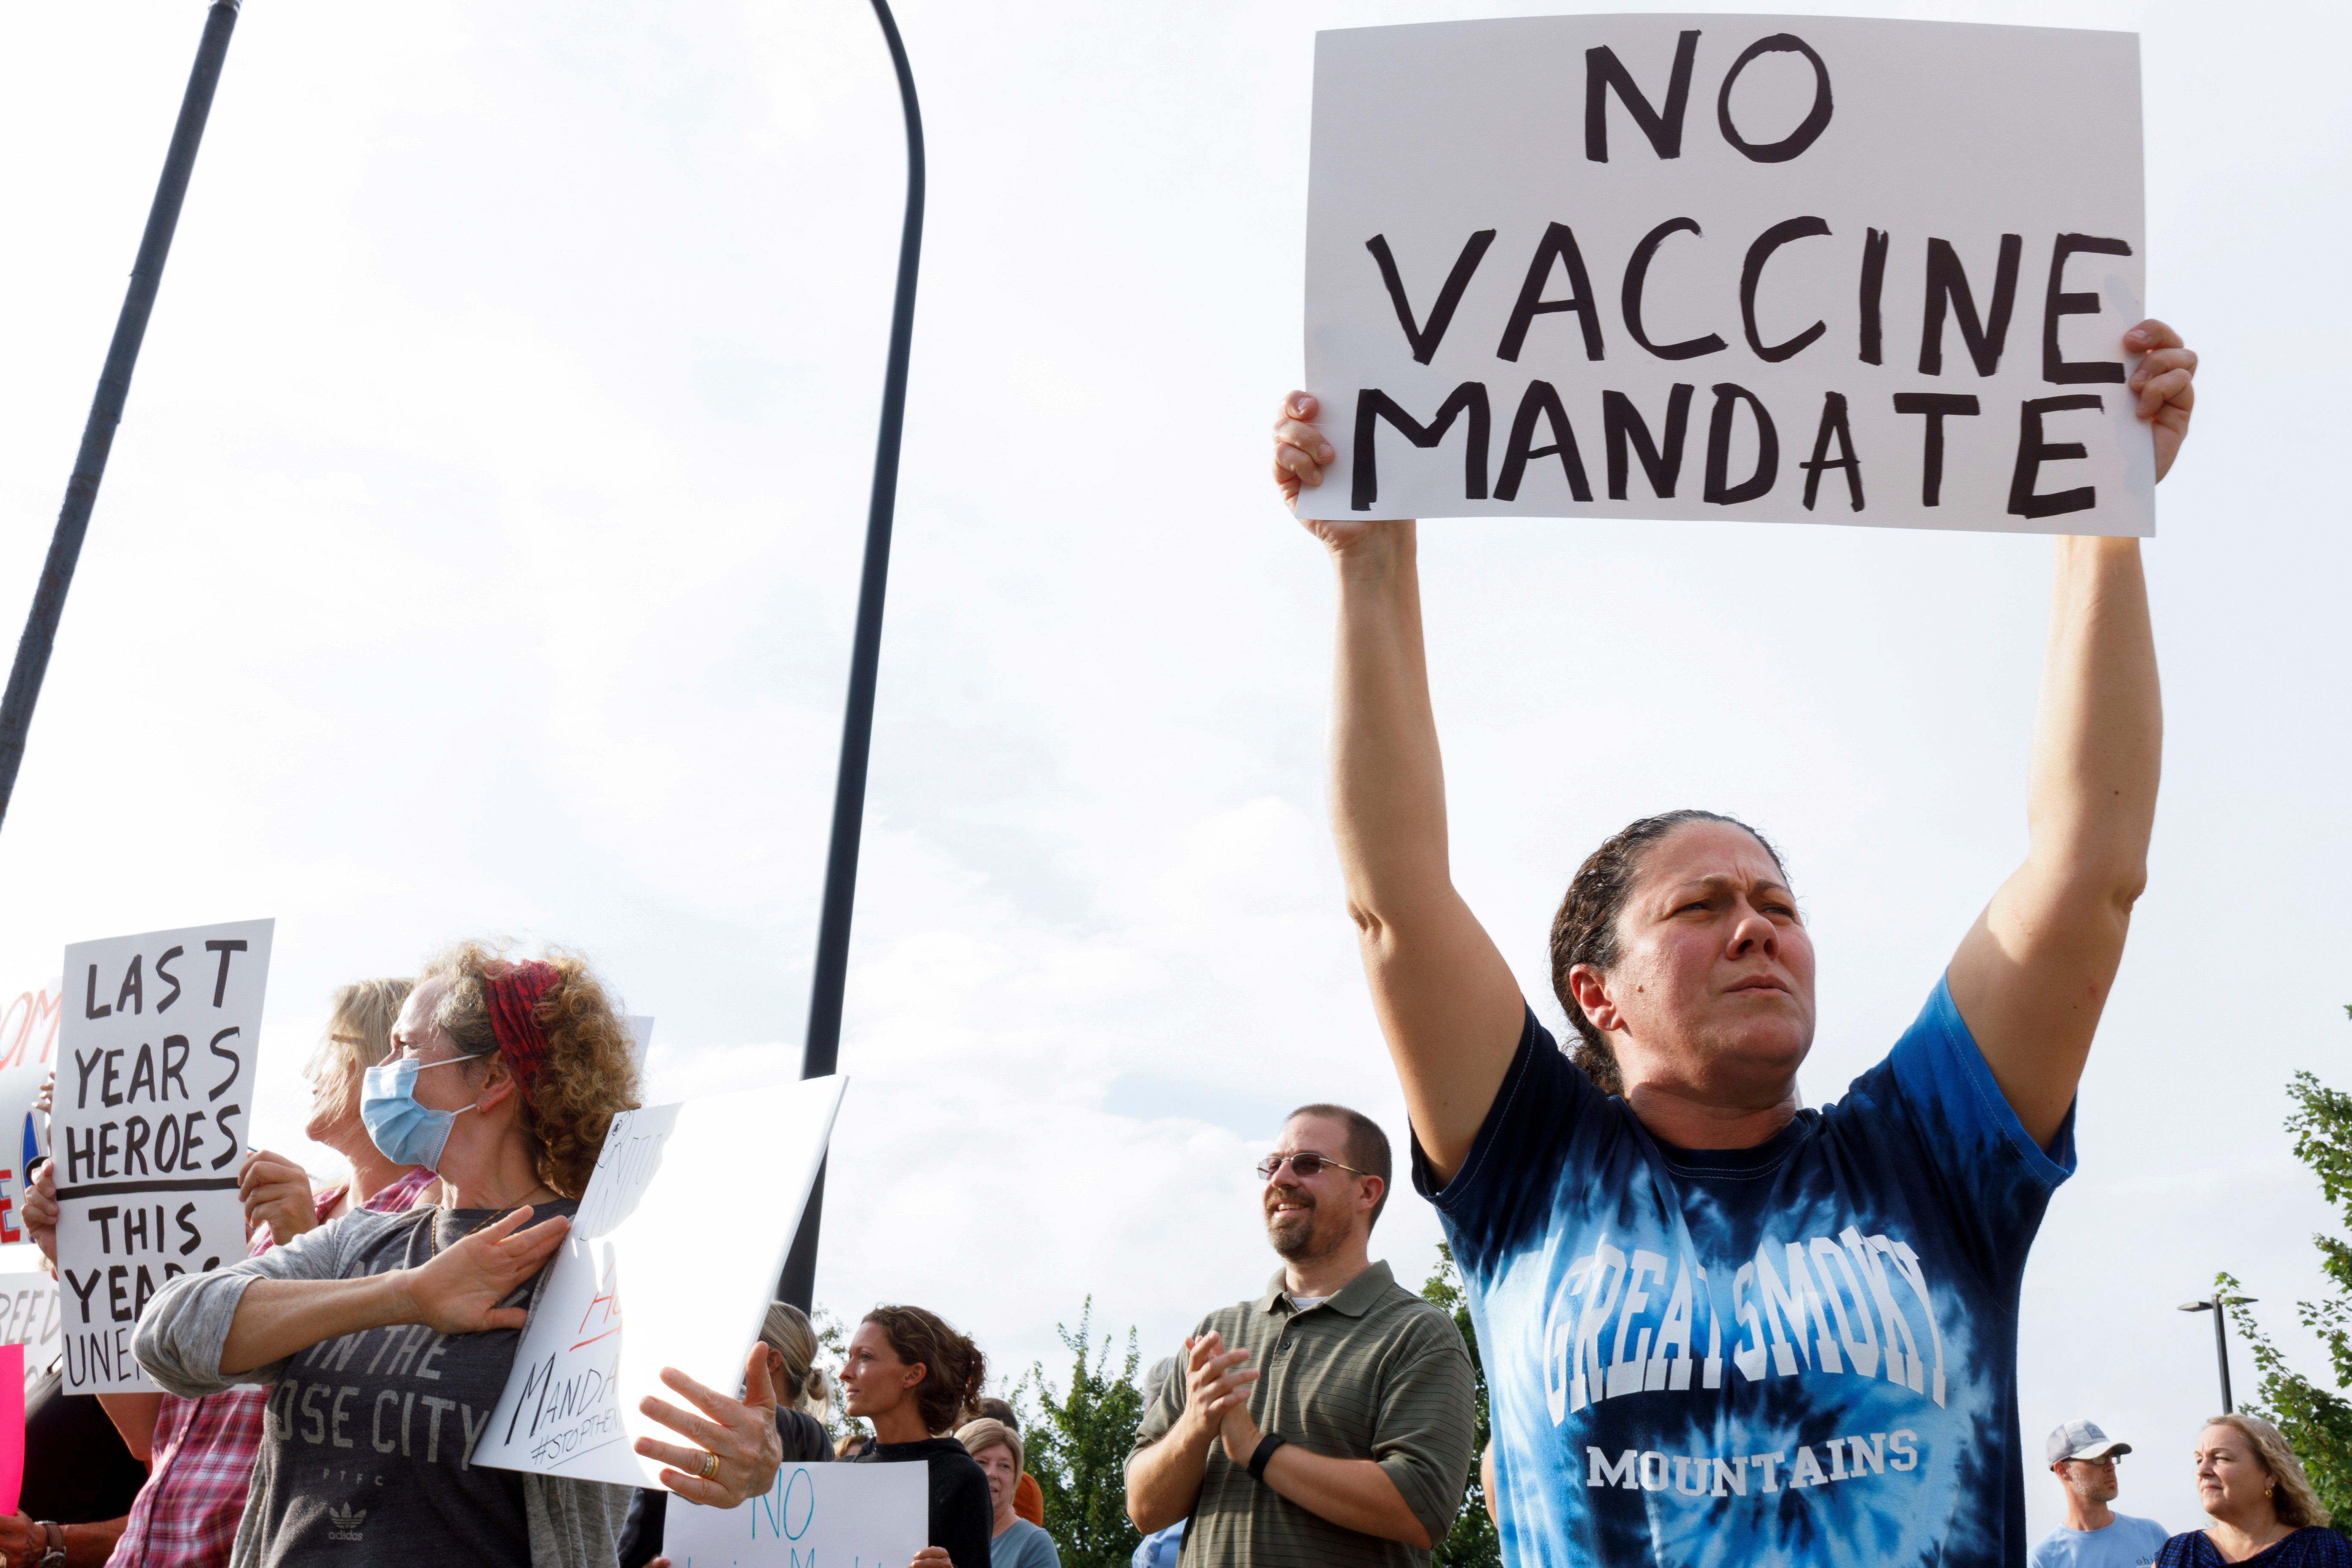 Jamie Horning, 43, of Union Town, raises a sign to protest against the coronavirus vaccine mandates at Summa Health Hospital in Akron, Ohio, 16 August 2021